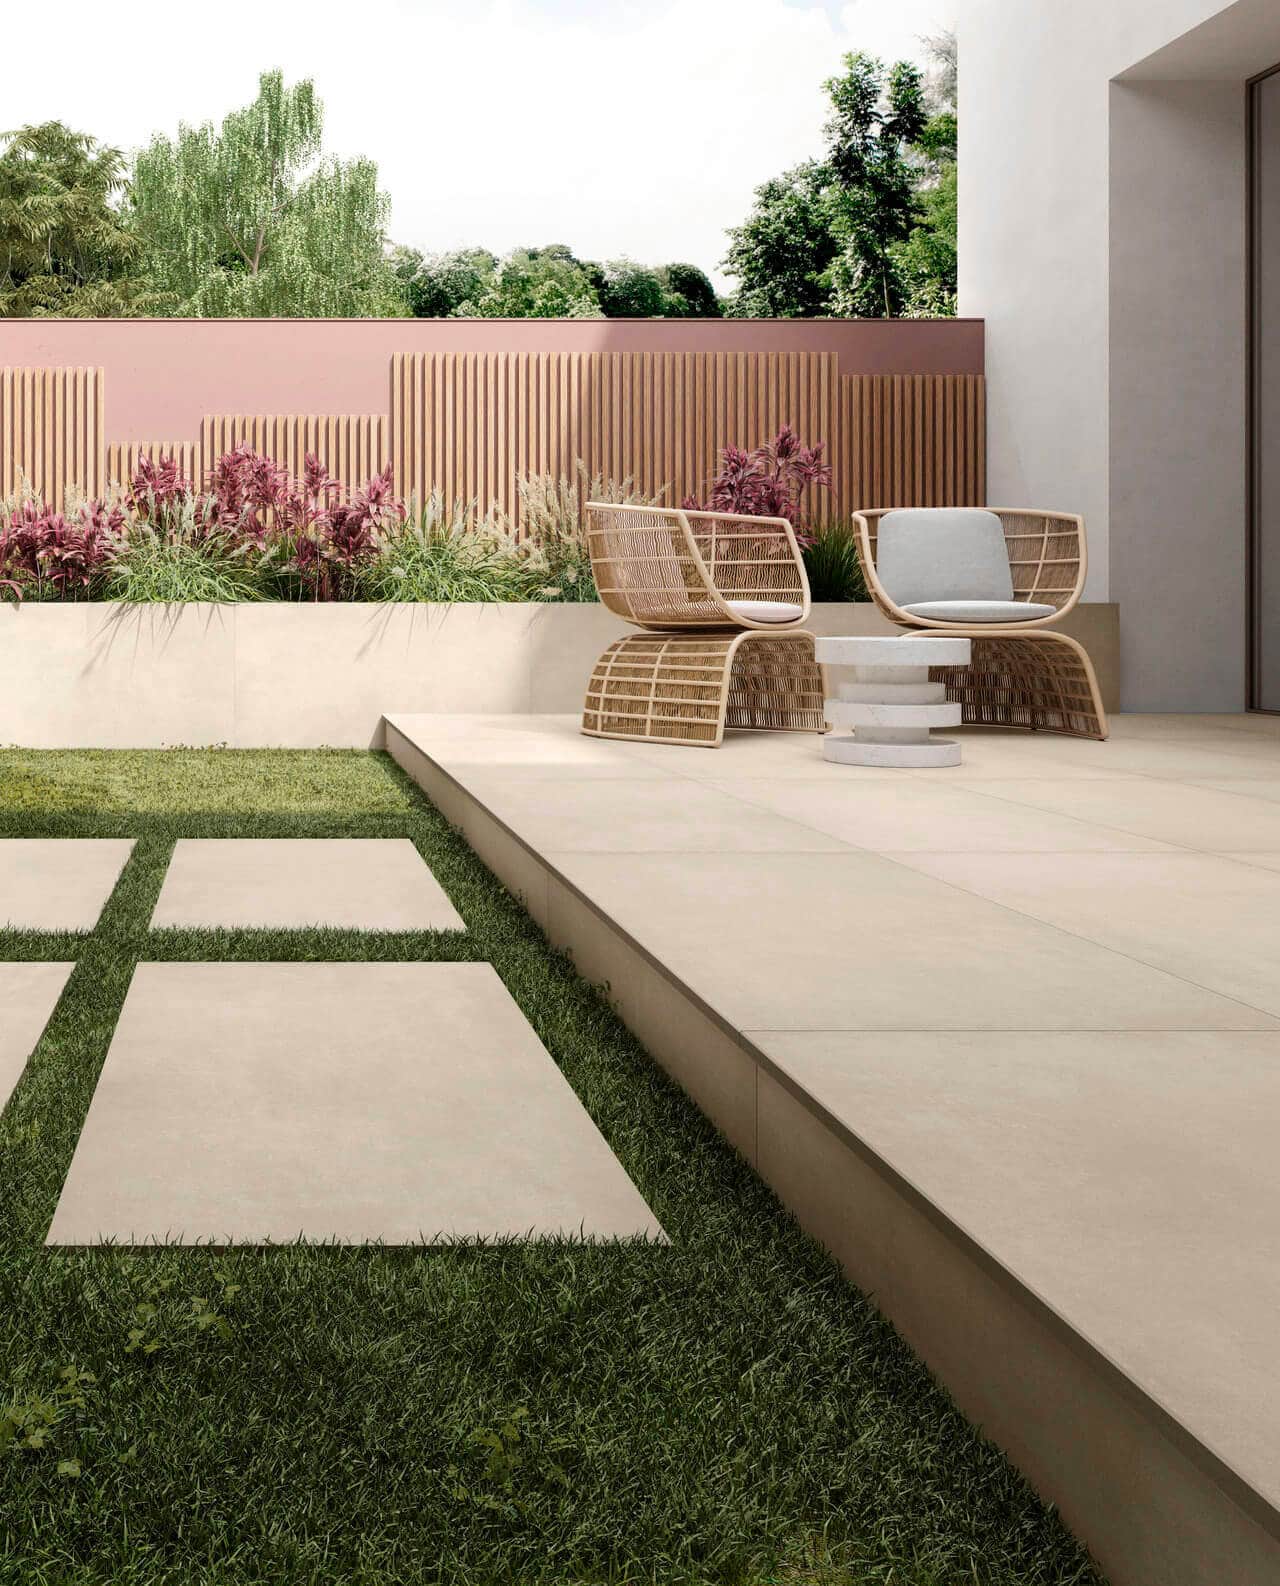 Outdoor seating space with cream porcelain pavers with grass in between